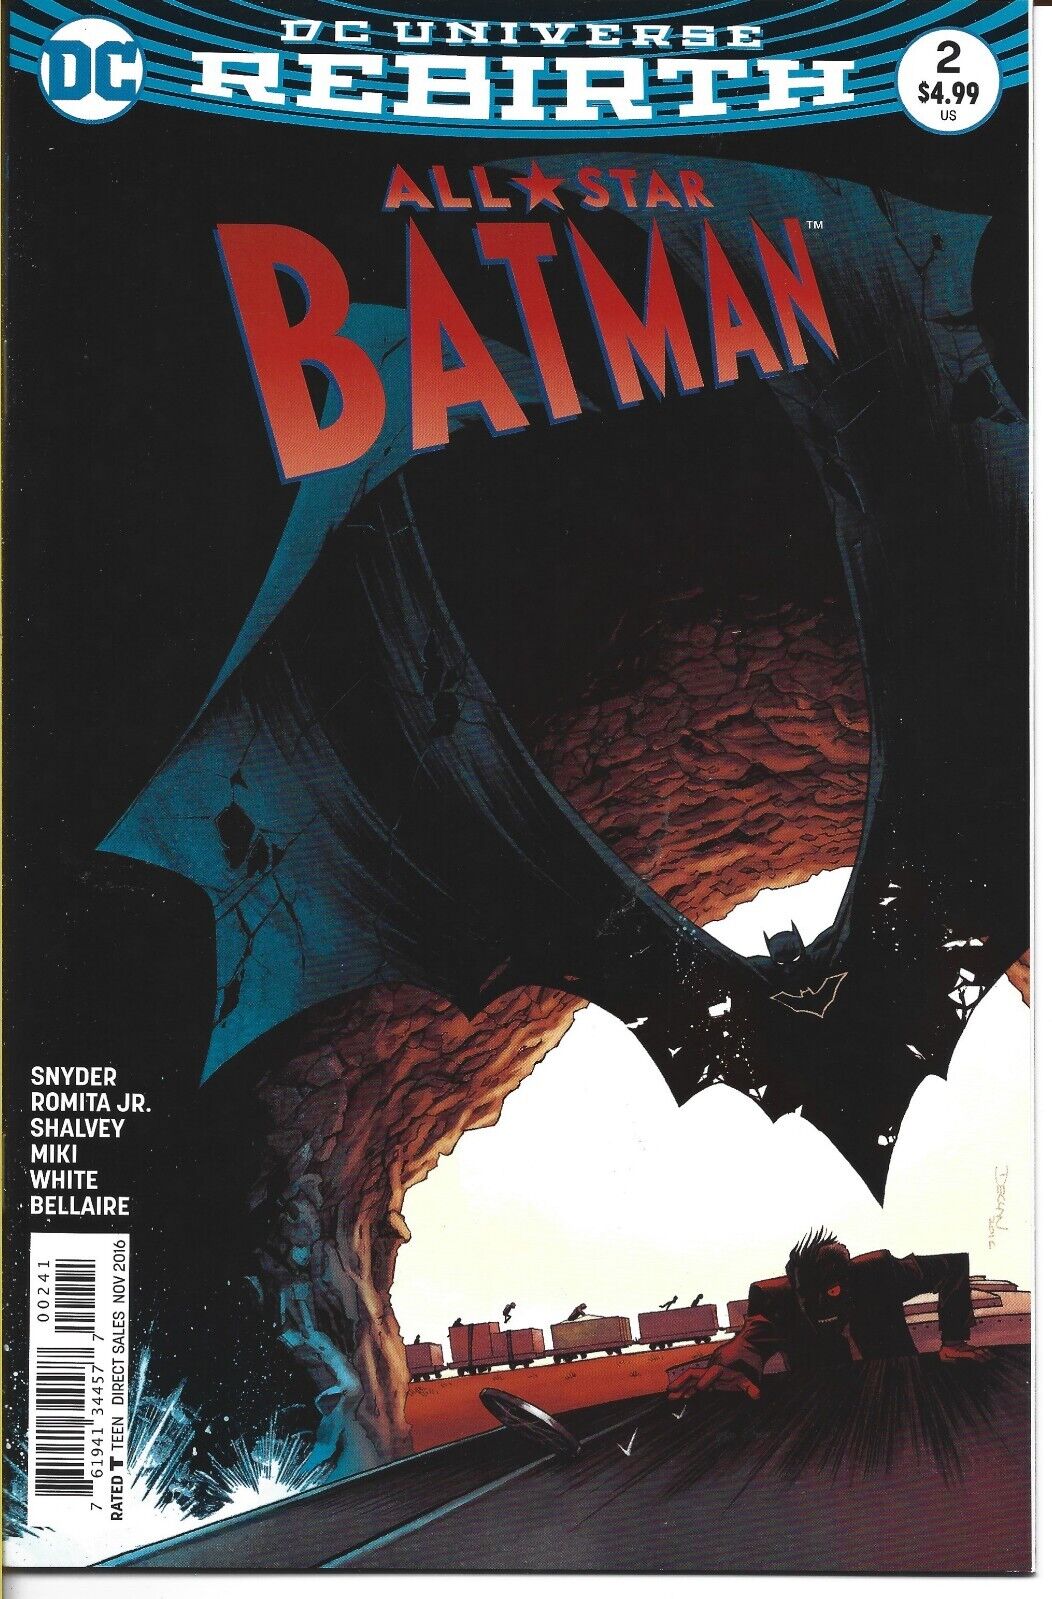 ALL STAR BATMAN #2 DECLAN SHALVEY VARIANT DC COMICS 2016 BAGGED AND BOARDED